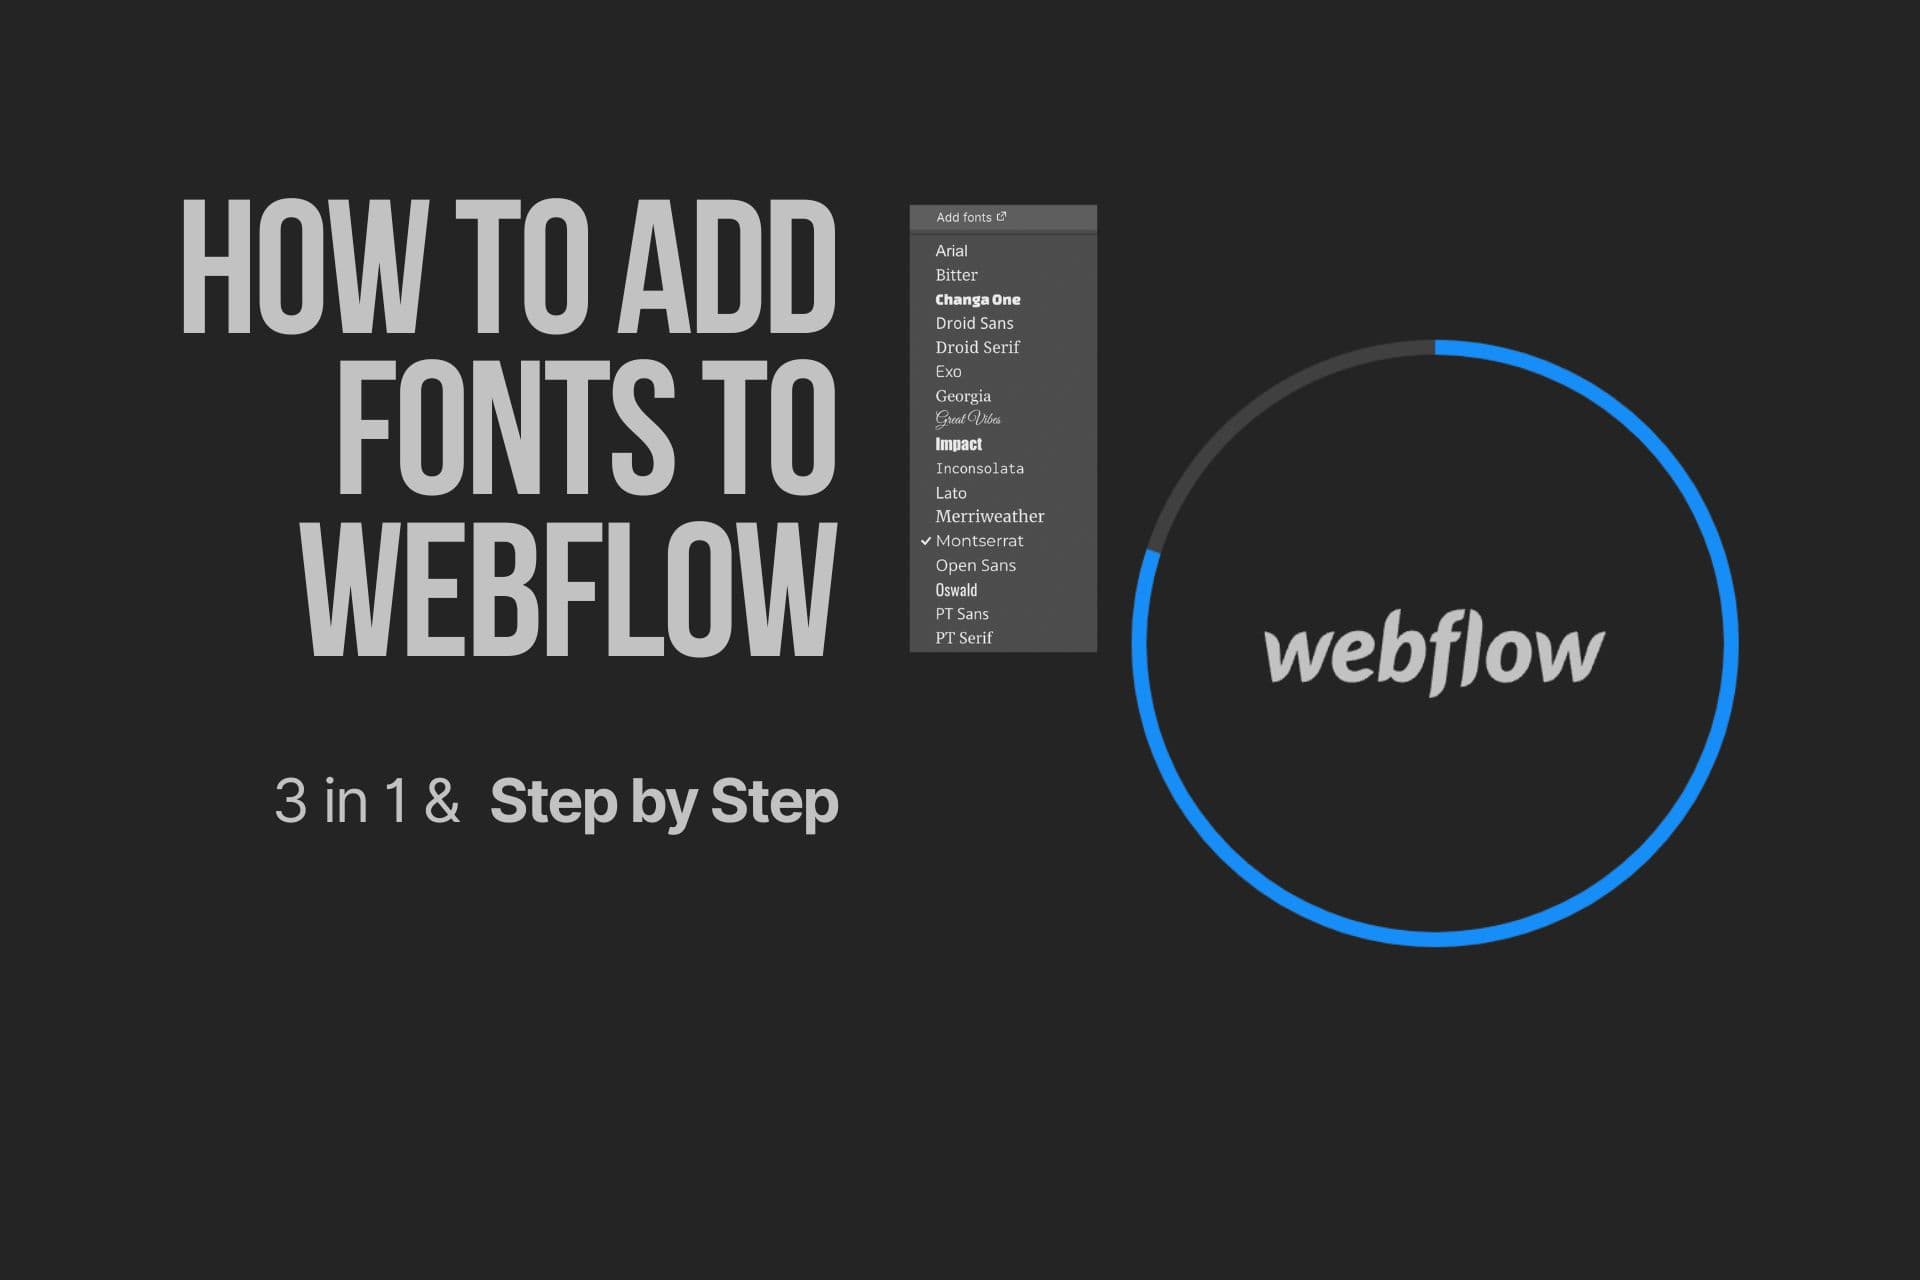 How to Add Fonts to Webflow: Three in One & Step by Step